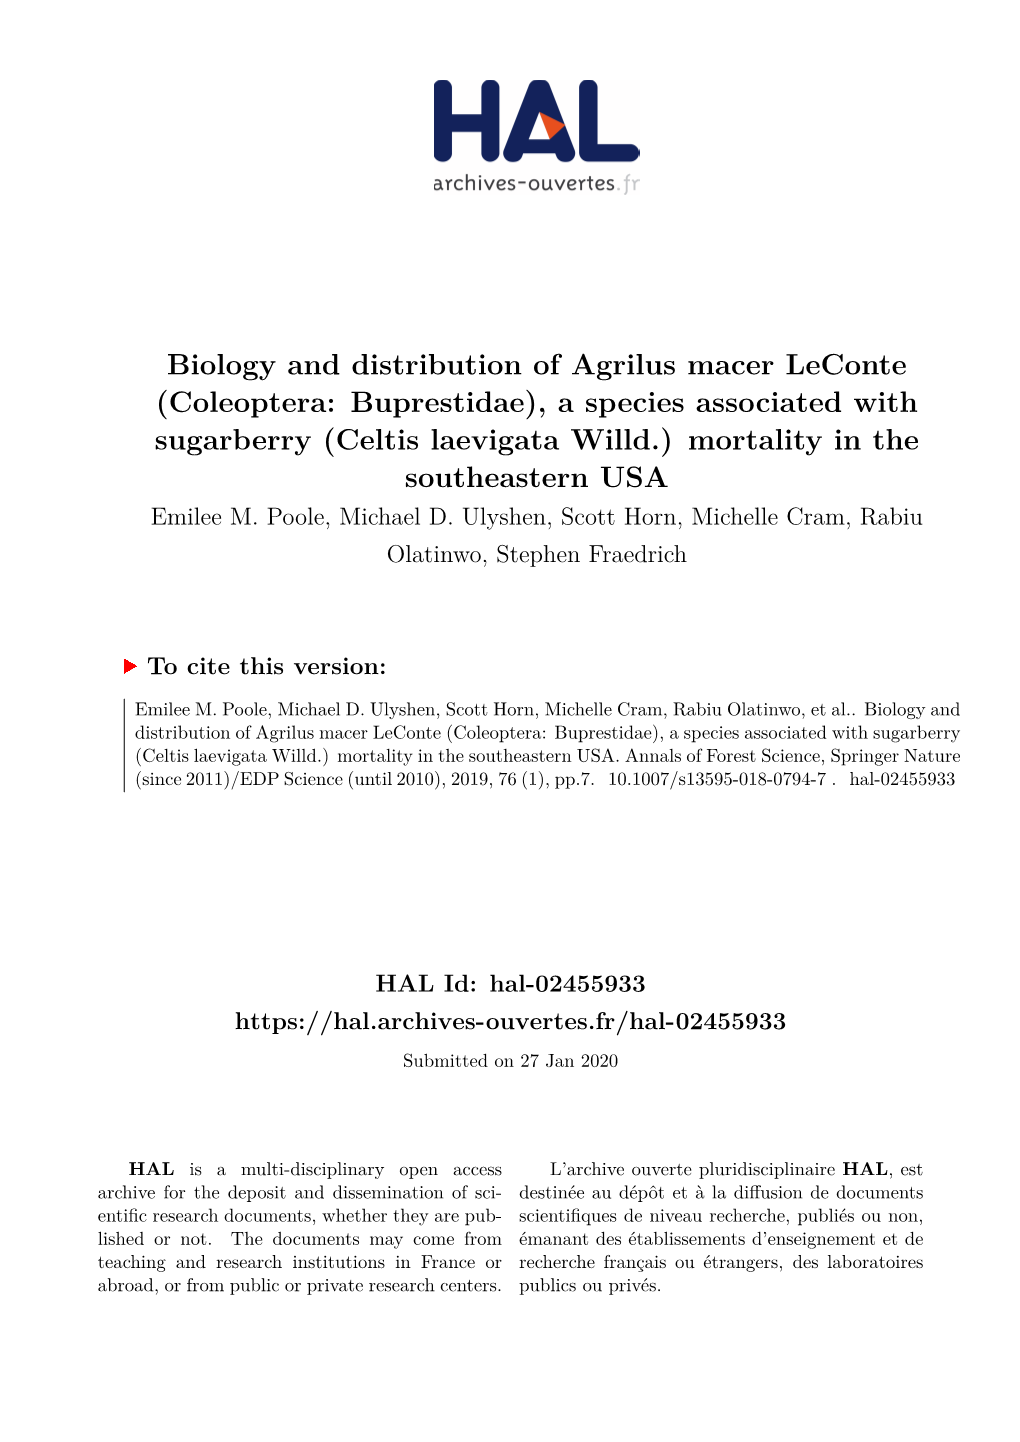 Biology and Distribution of Agrilus Macer Leconte (Coleoptera